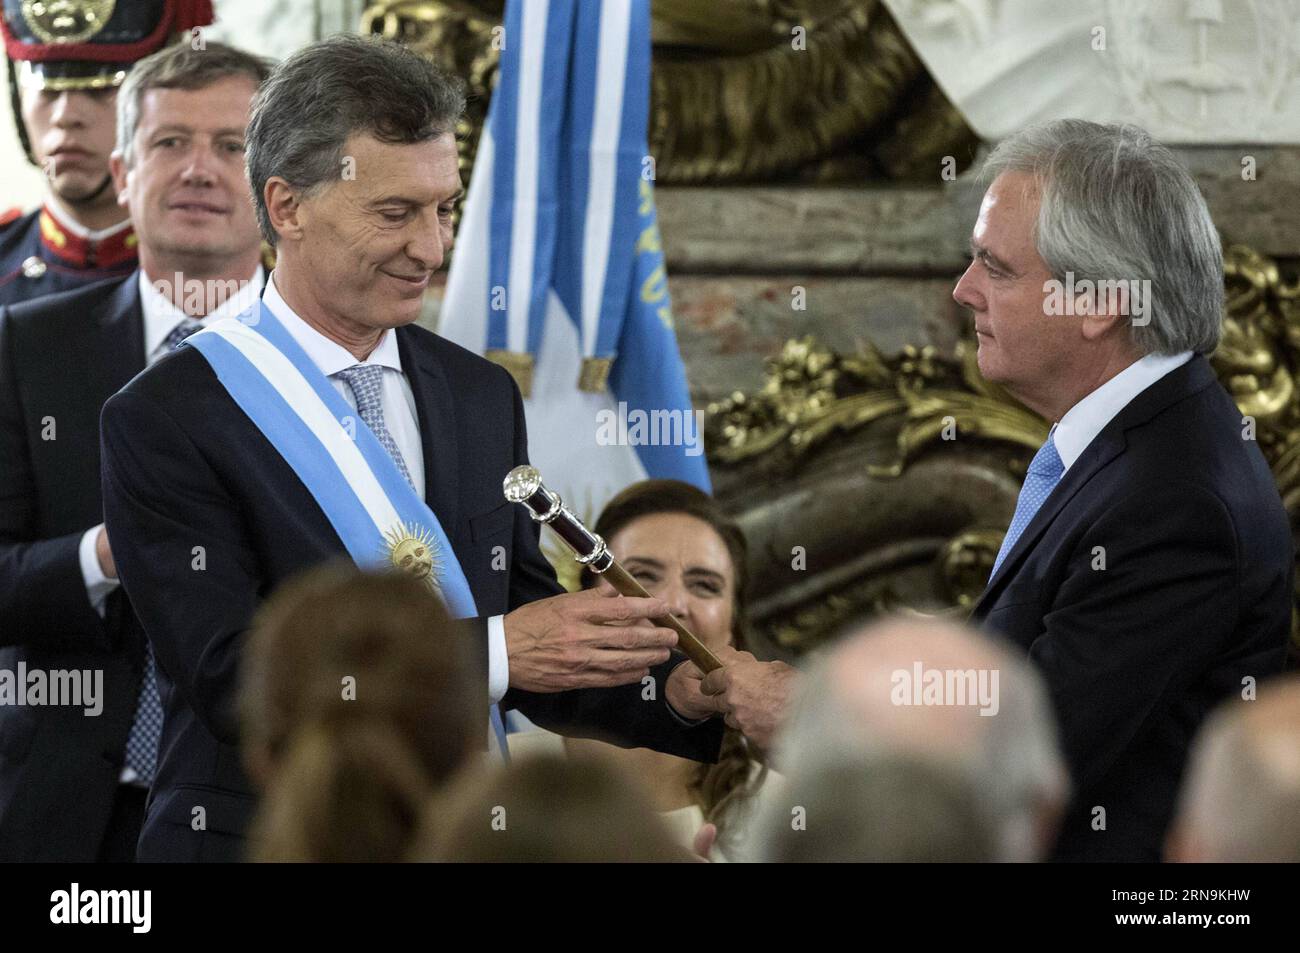 (151210) -- BUENOS AIRES, Dec. 10, 2015 -- Argentina s new President Mauricio Macri (L) receives the presidential baton from the provisional President of the Argentine Senate Federico Pinedo (R) at White Room of Casa Rosada (Pink House) in Buenos Aires city, capital of Argentina, on Dec. 10, 2015. Mauricio Macri on Thursday inaugurated as new Argentine President, succeeding Cristina Fernandez. Martin Zabala) (fnc) (ah) ARGENTINA-BUENOS AIRES-POLITICS-INAUGURATION e MARTINxZABALA PUBLICATIONxNOTxINxCHN   151210 Buenos Aires DEC 10 2015 Argentina S New President Mauricio Macri l receives The Pre Stock Photo